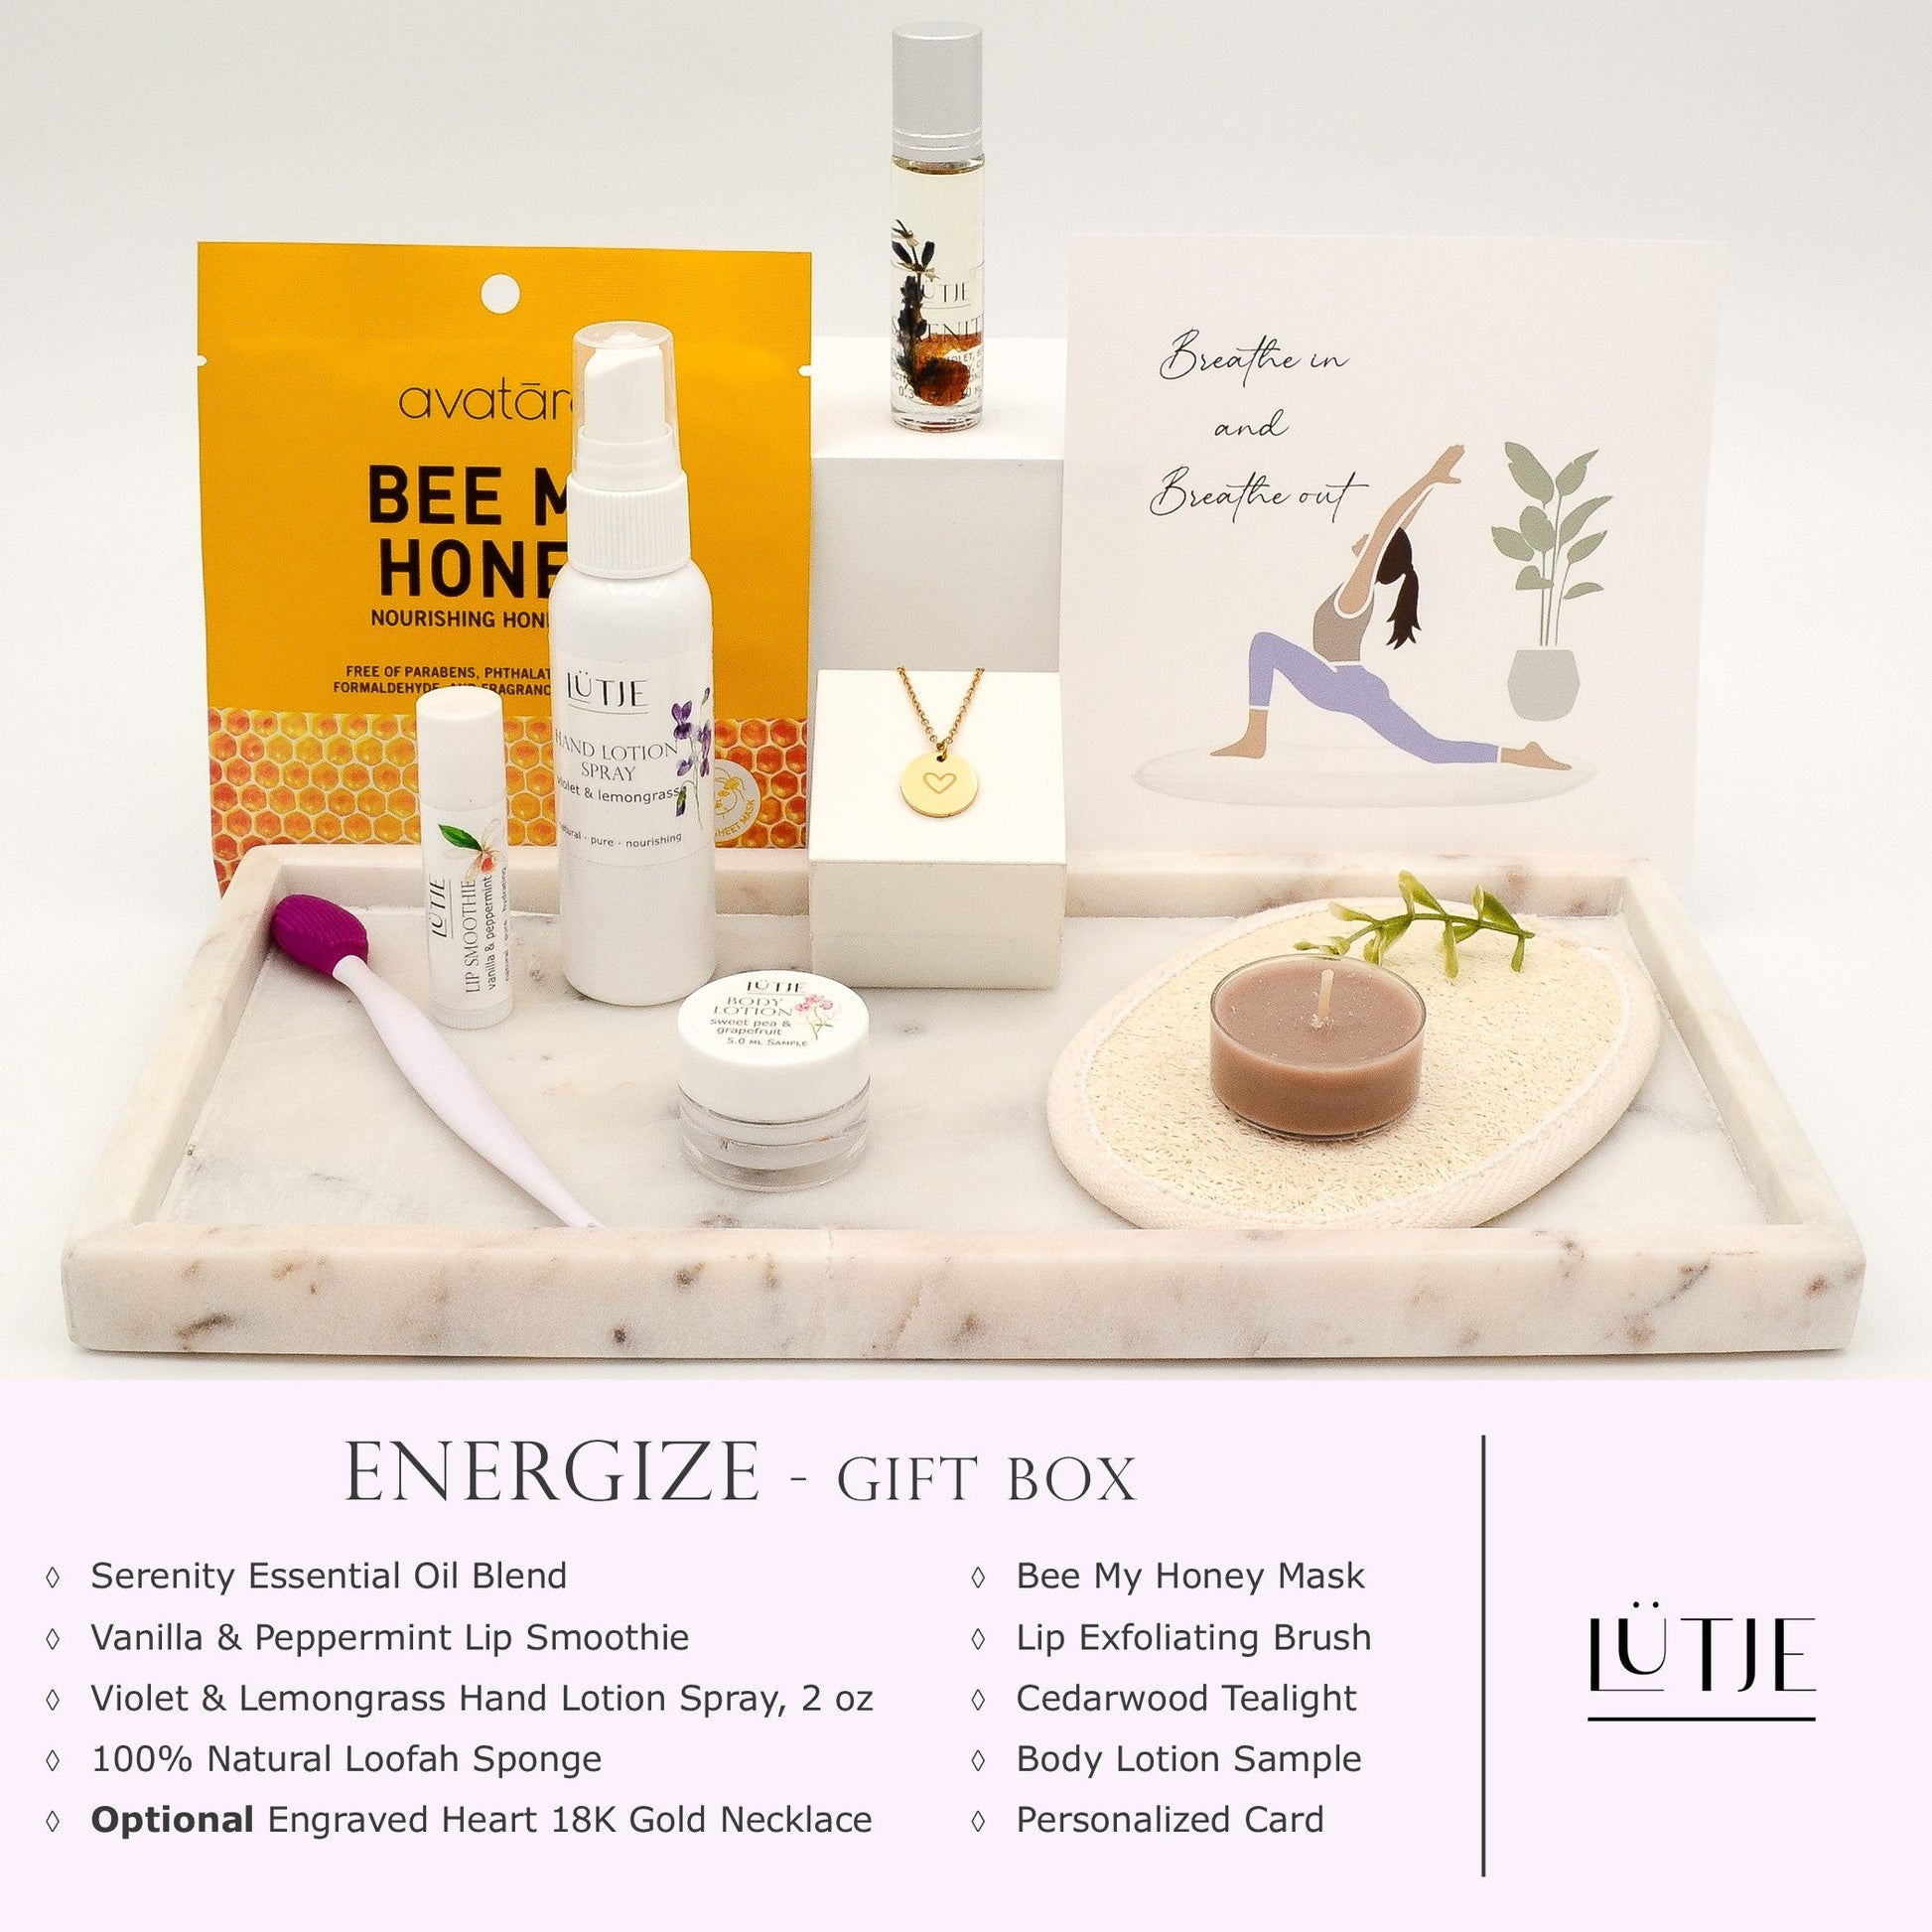 Energize Gift Box for women, BFF, wife, daughter, sister, mom, or grandma, includes Violet & Lemongrass hand lotion spray, essential oil, lip balm, hydrating face mask, other bath, spa and self-care items, and optional 18K gold-plated necklace with engraved heart.